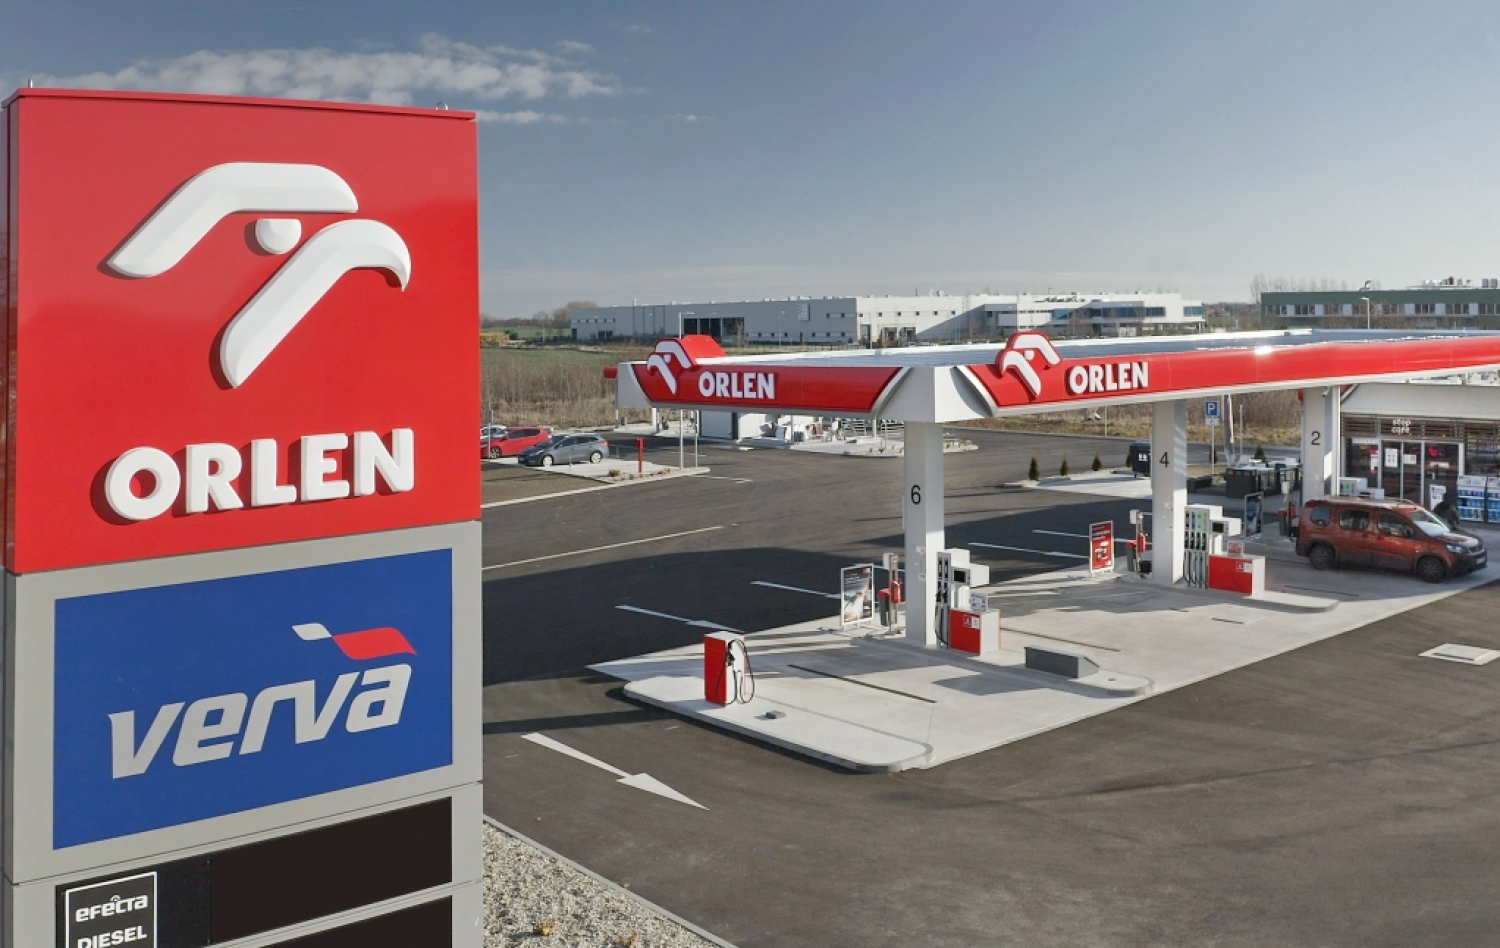 ORLEN expands its fuel station network in Europe